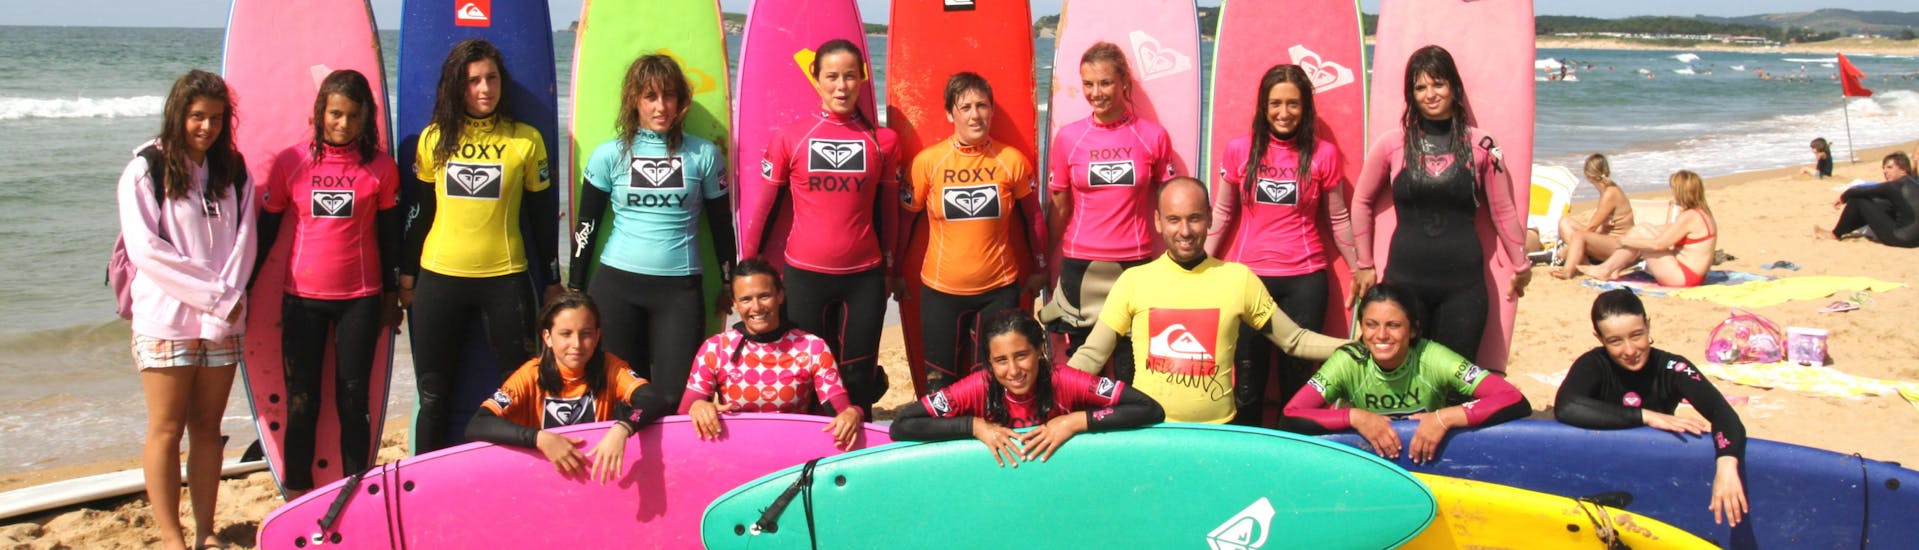 Surf lesson participant taking a group picture at Playa de Somo during an activity provided by Escuela Cántabra de Surf Quiksilver Roxy